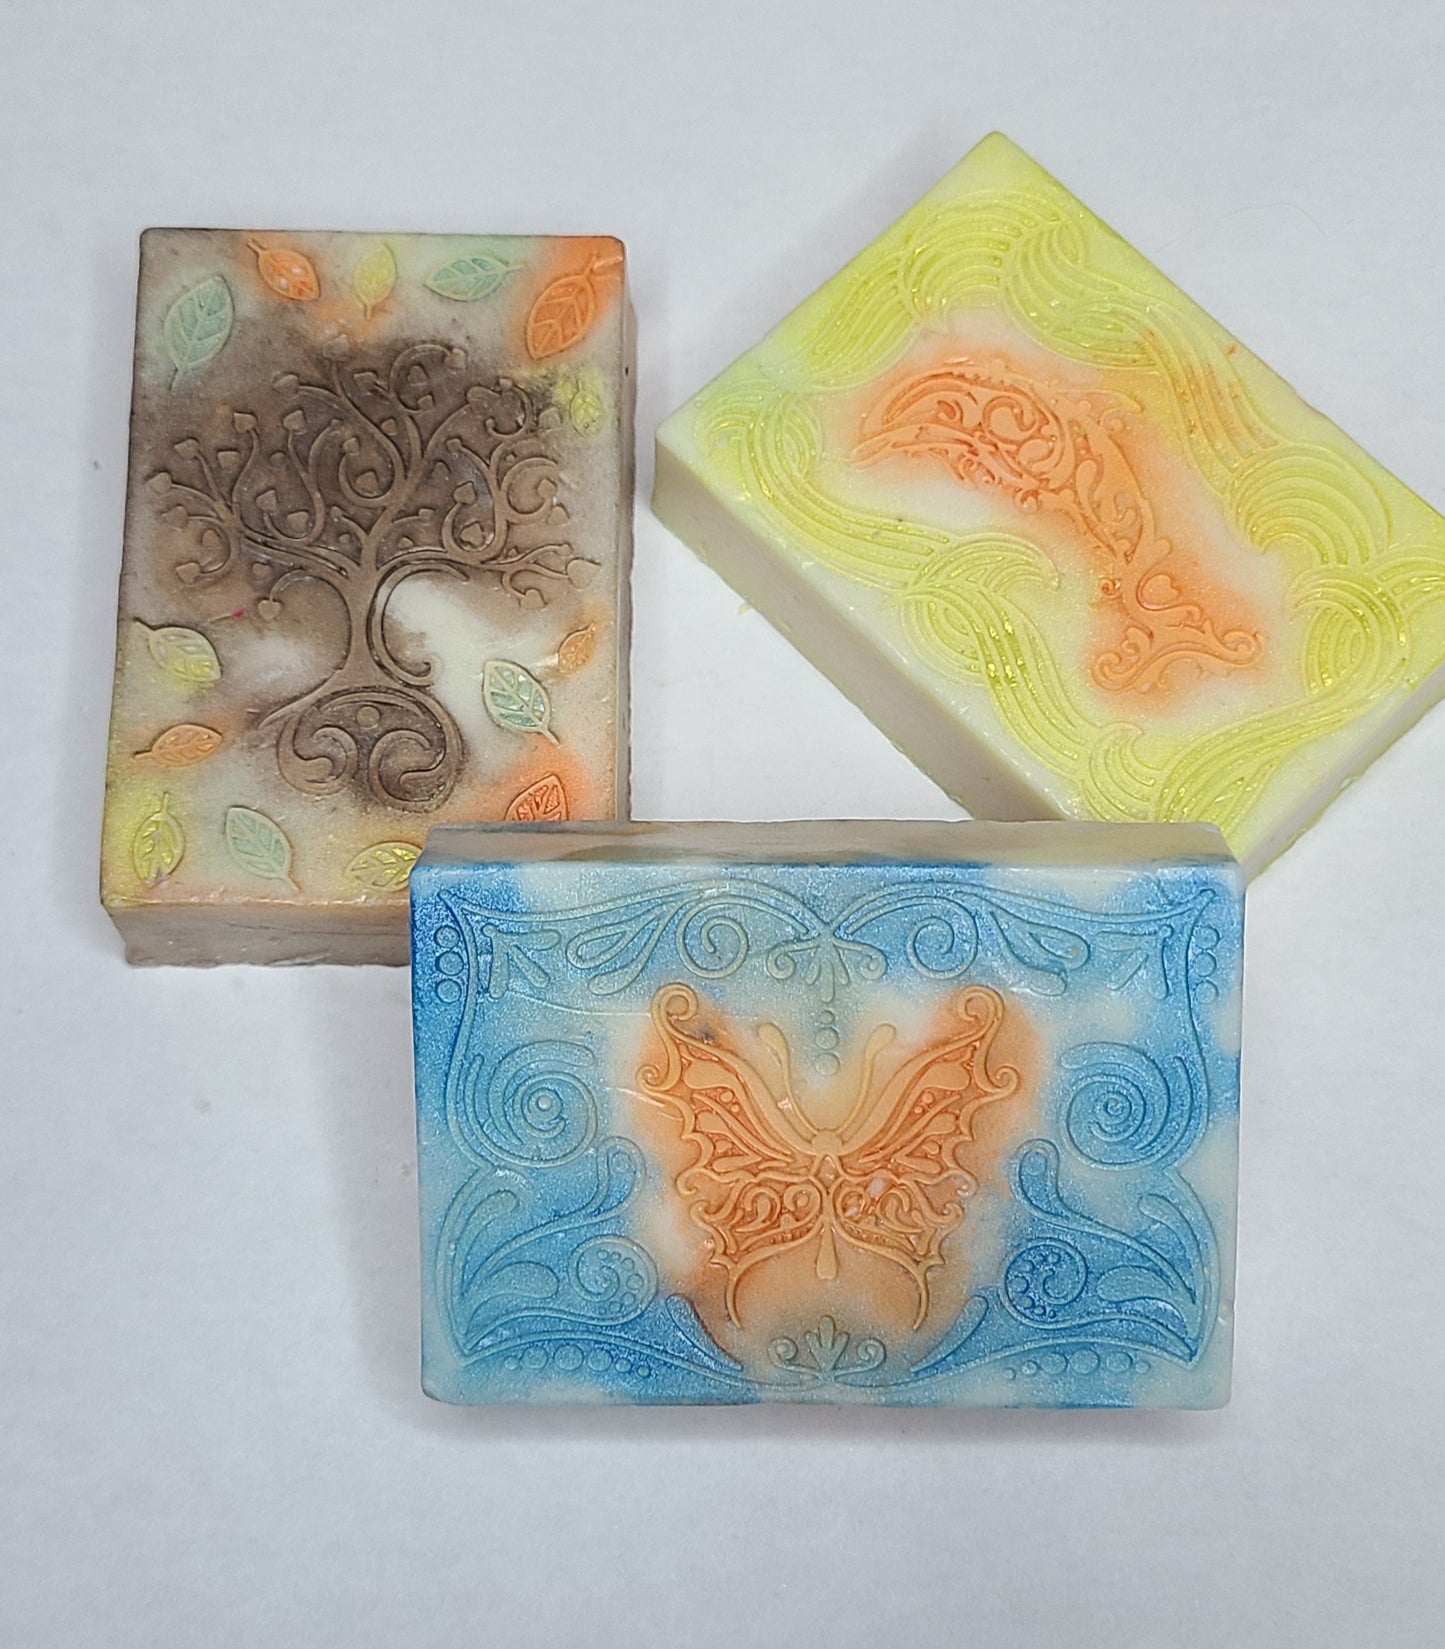 Hand soap (goats milk)Tree, Dolphin and butterfly